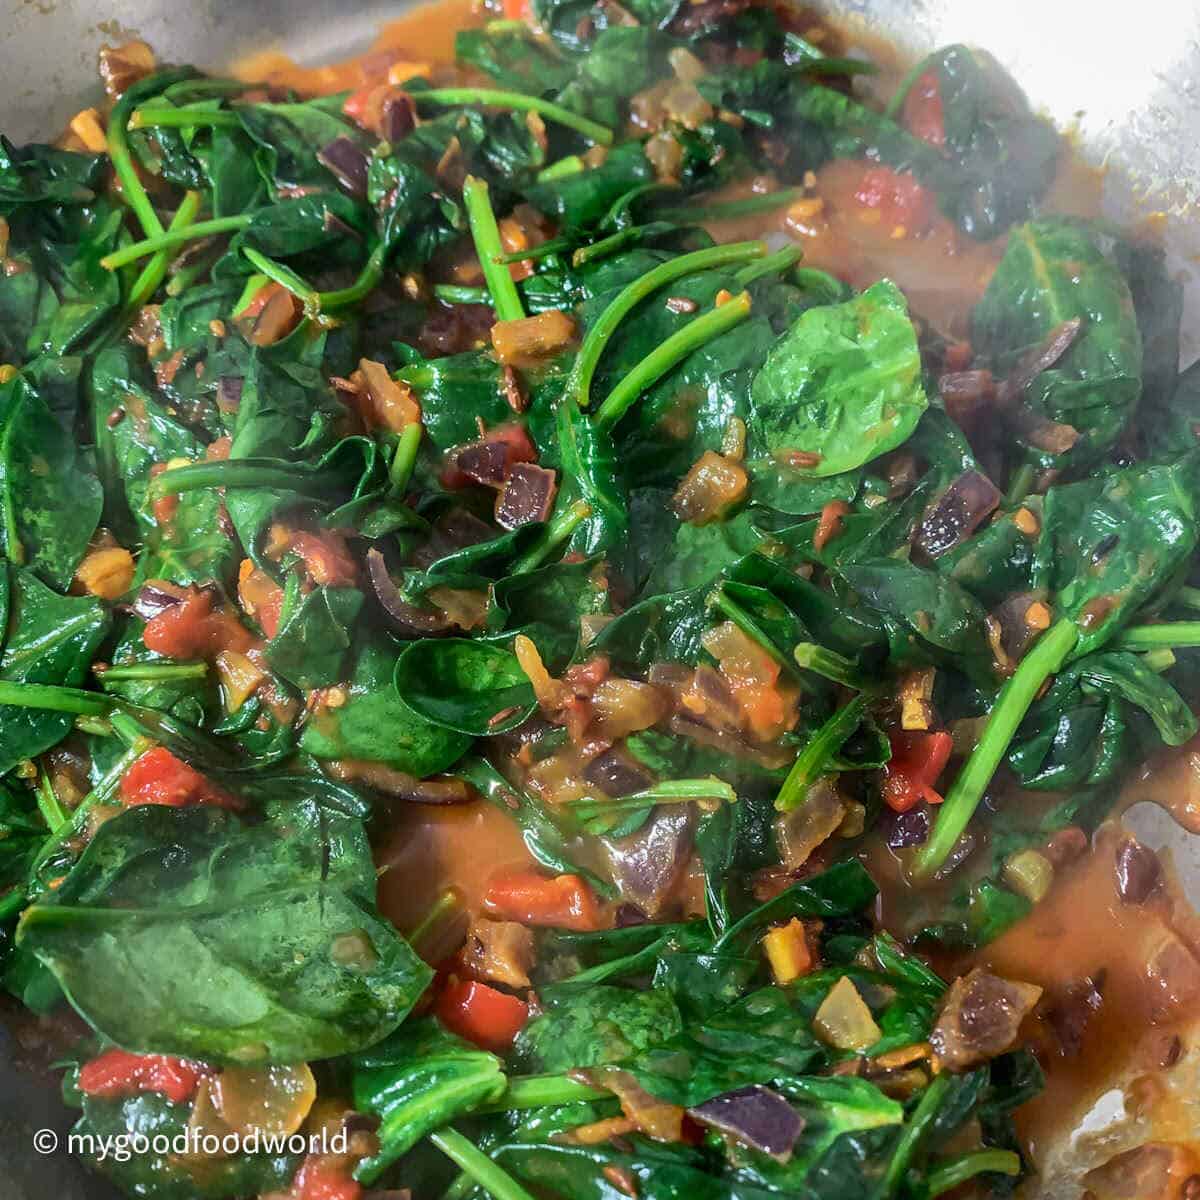 Spinach wilting and cooking in tomato gravy.